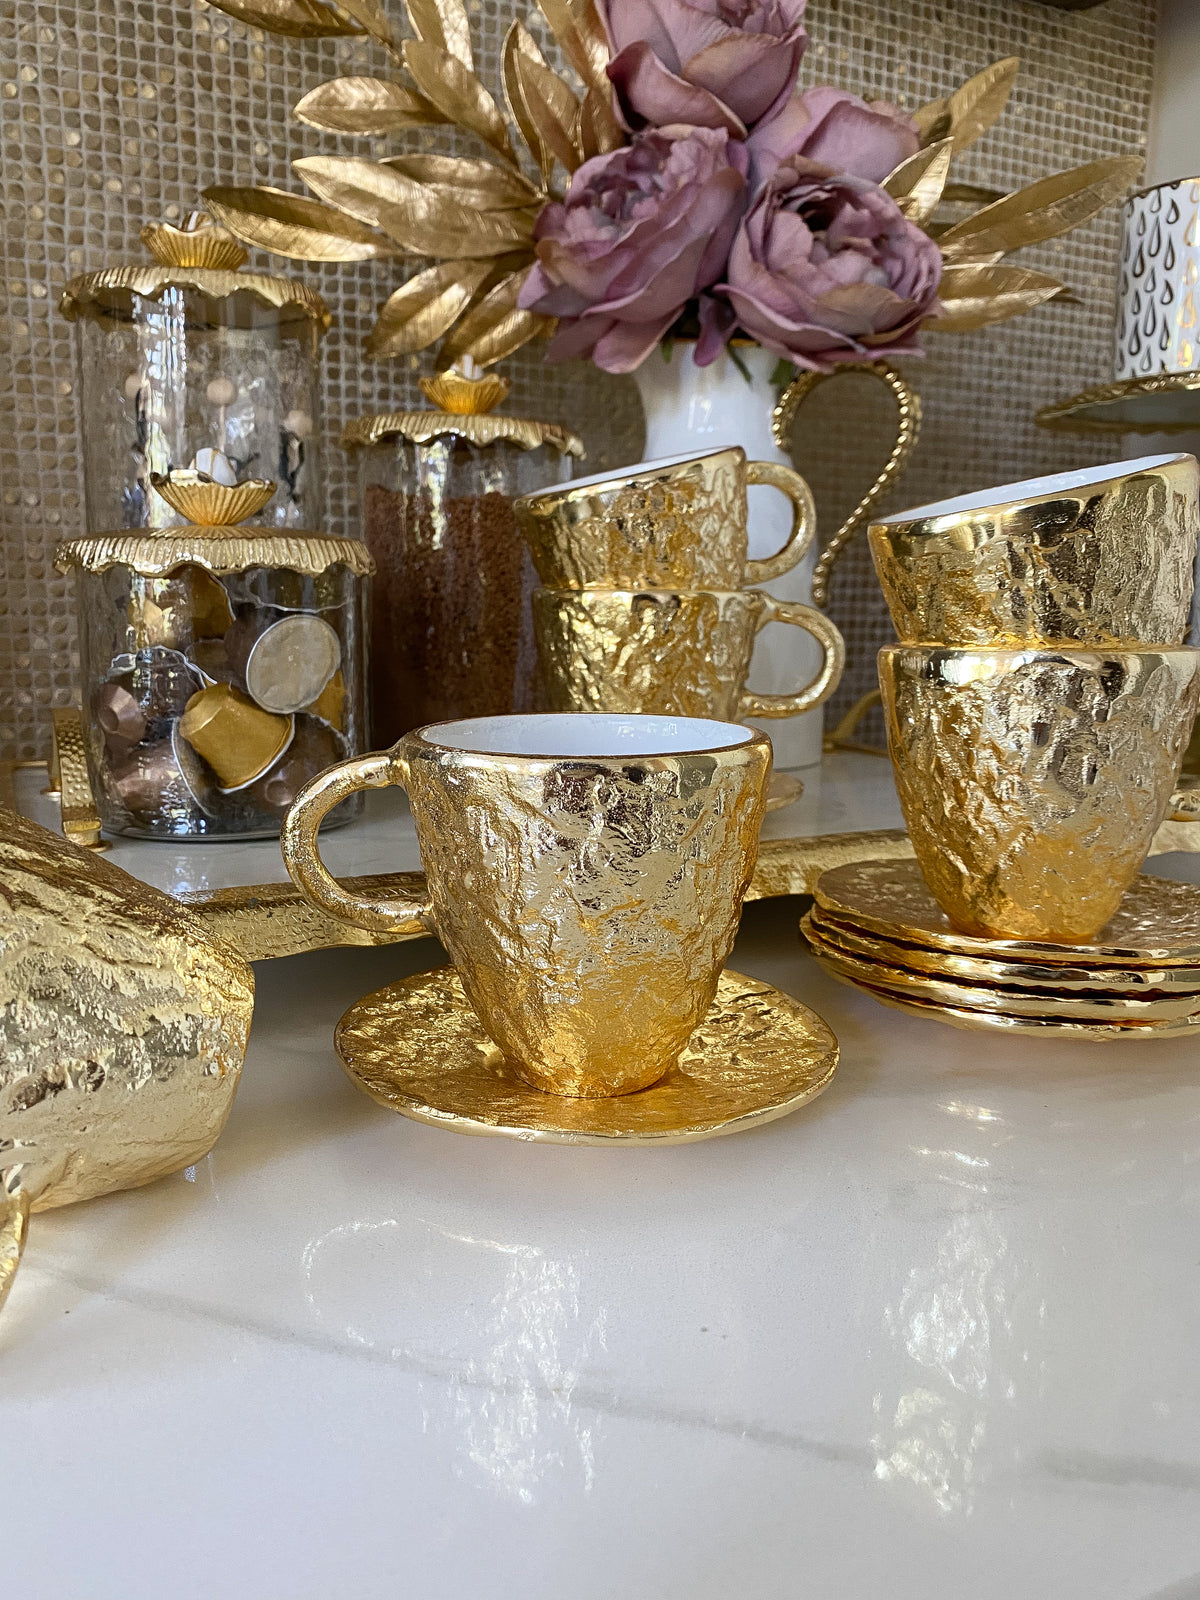 https://www.shopinspiremehomedecor.shop/wp-content/uploads/1693/26/gold-textured-metal-tea-cup-and-saucer-with-white-interior-inspire-me-home-decor-explore-a-world-of-possibilities-take-a-look-at-our-extensive-selection_4.jpg